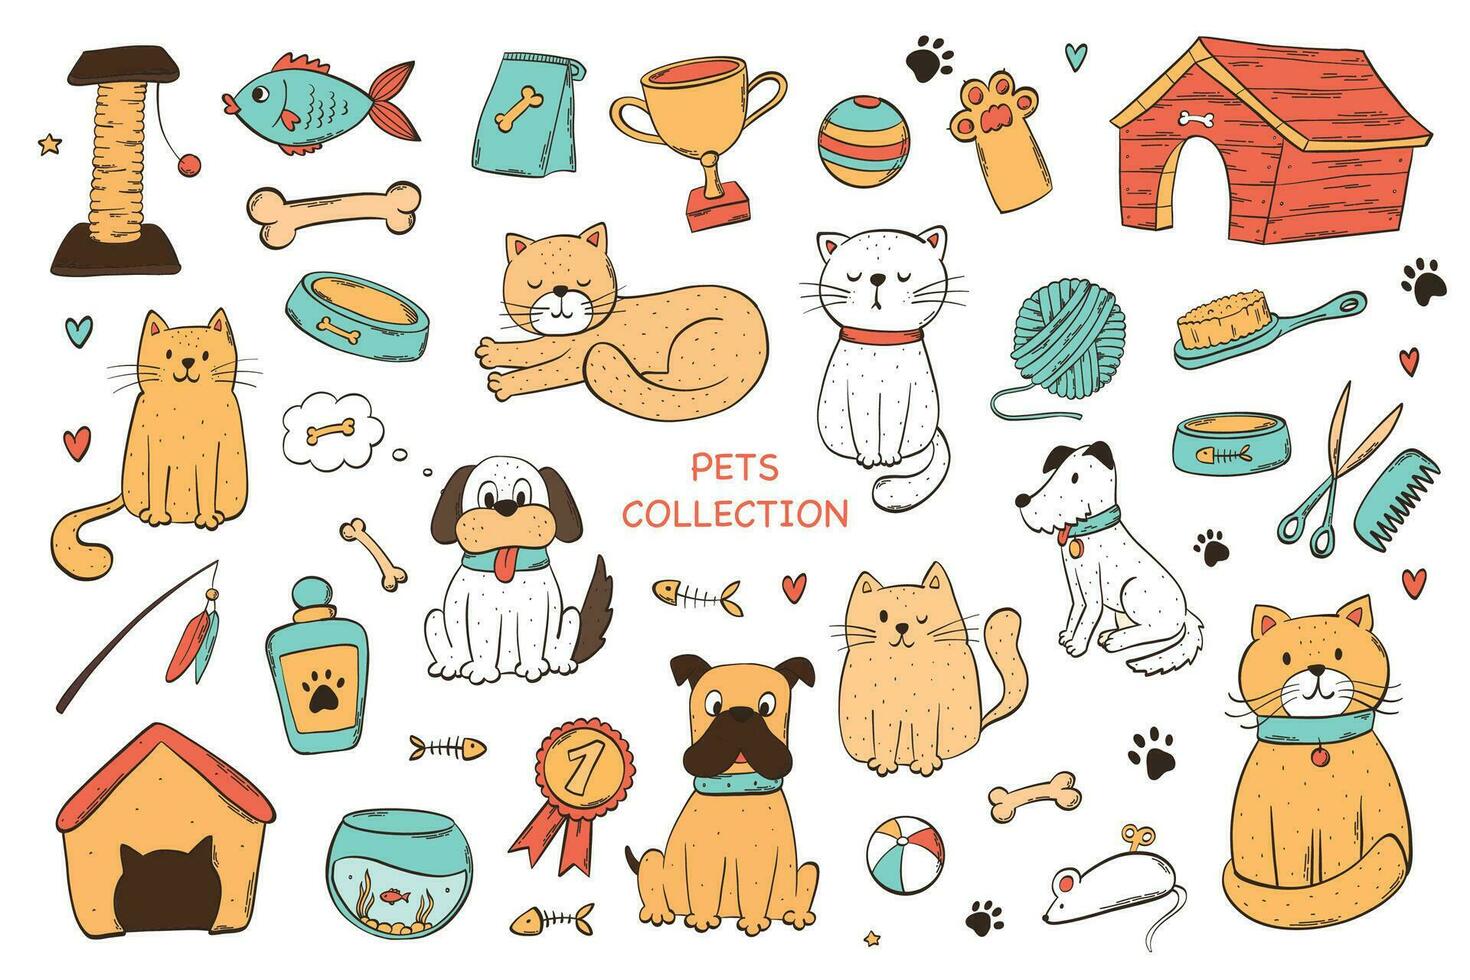 Set of pets, pet shop doodles, cartoon elements and clip art for stickers, prints, icons, signs, banners, cards, product decor, etc. EPS 10 vector